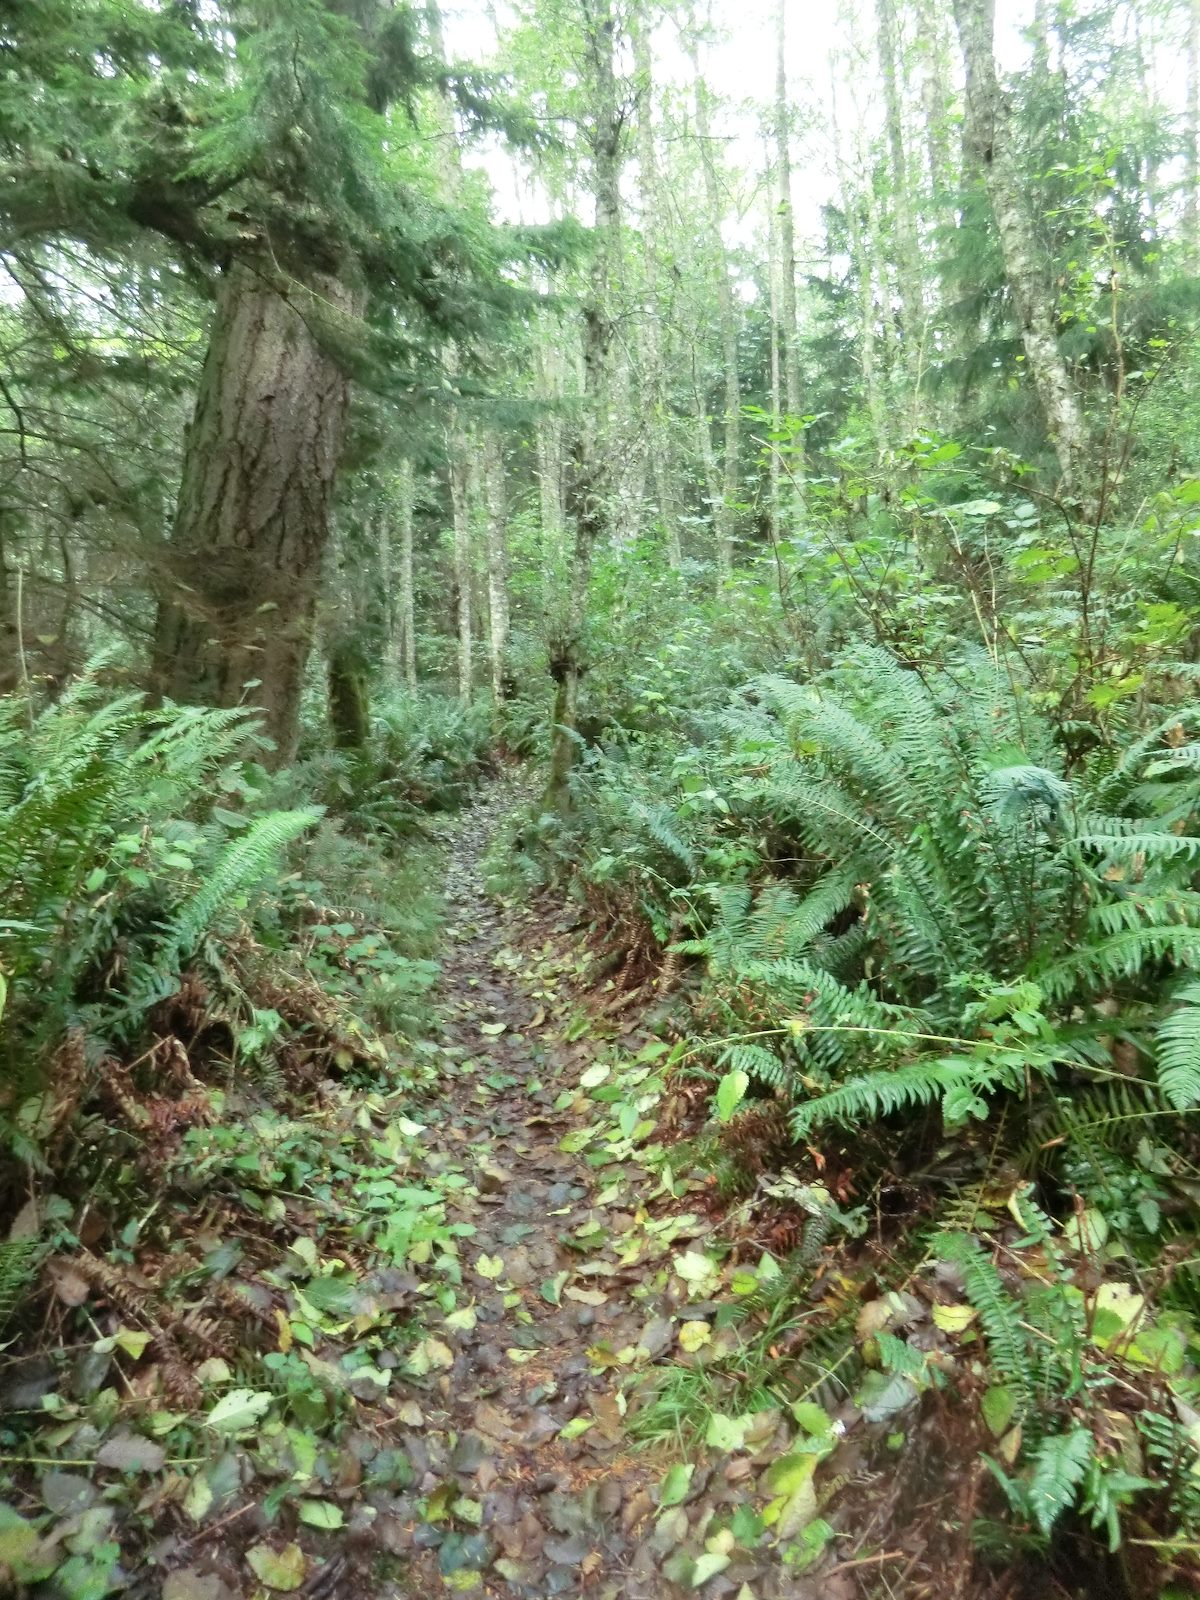 2012 October Typical Trail in the Hoypus Area of Deception Pass State Park